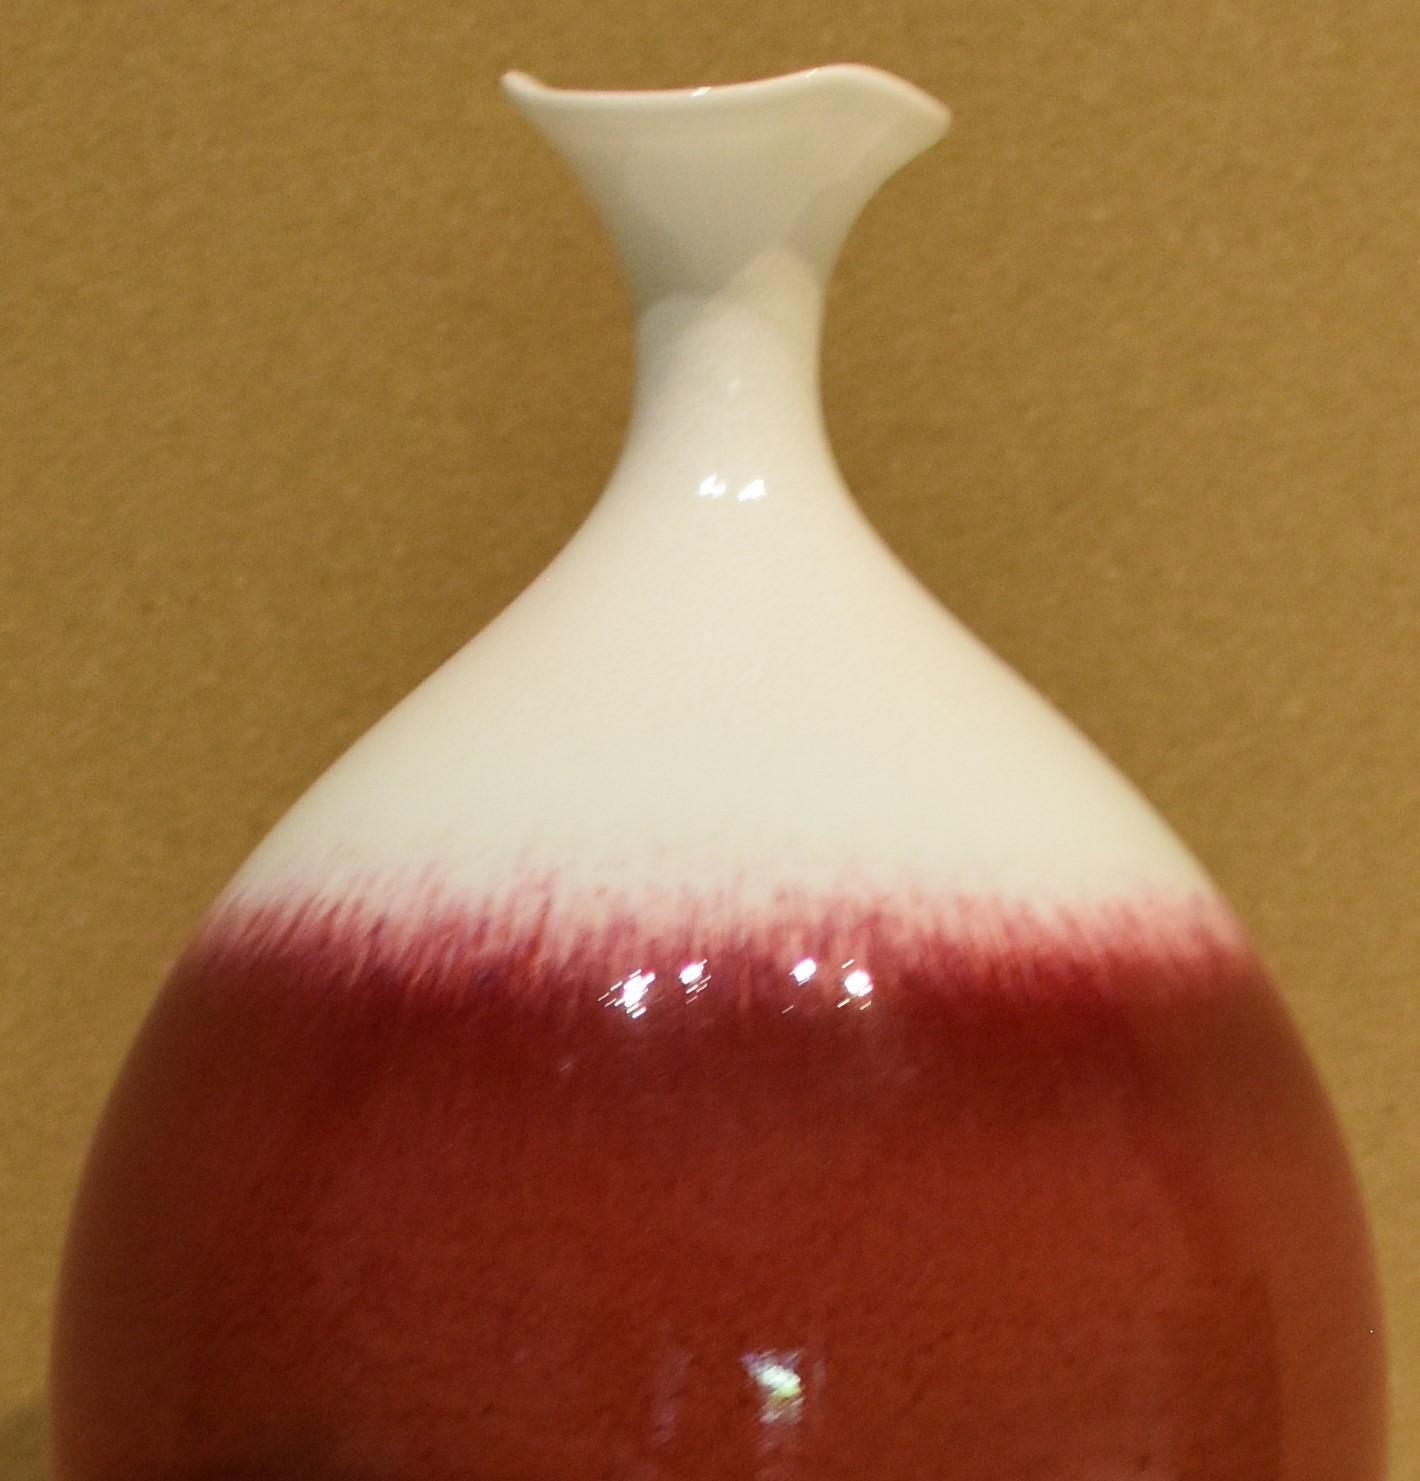 Exquisite hand-glazed Japanese contemporary decorative porcelain vase in an elegant shape in deep red and white, by a master porcelain artist of the Arita-Imari region of Japan.
The artist’s basic philosophy is to create a work of art that